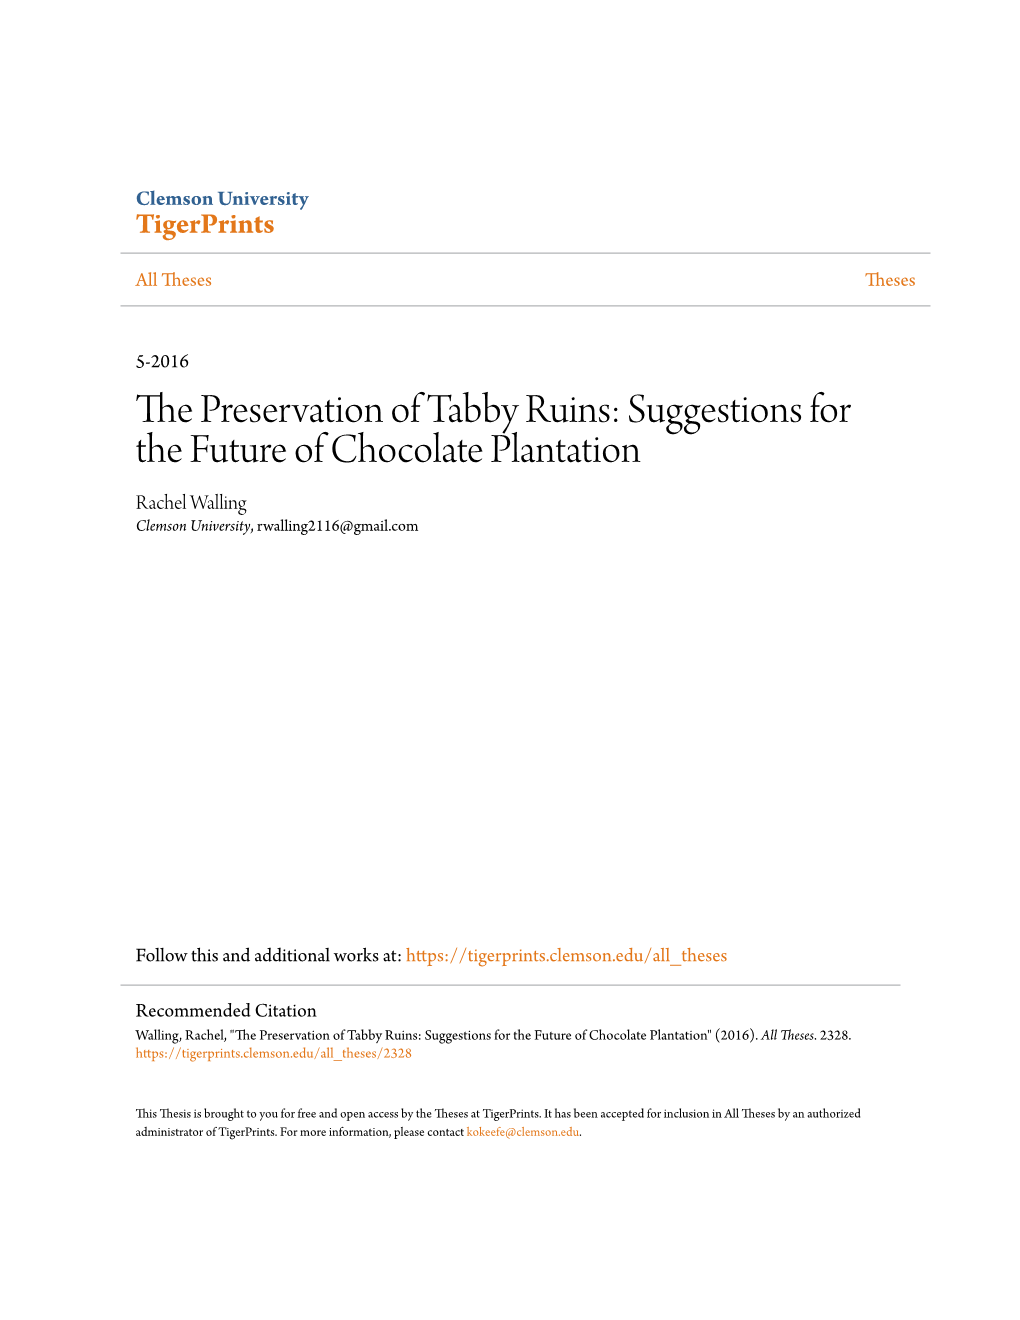 The Preservation of Tabby Ruins: Suggestions for the Future of Chocolate Plantation ______